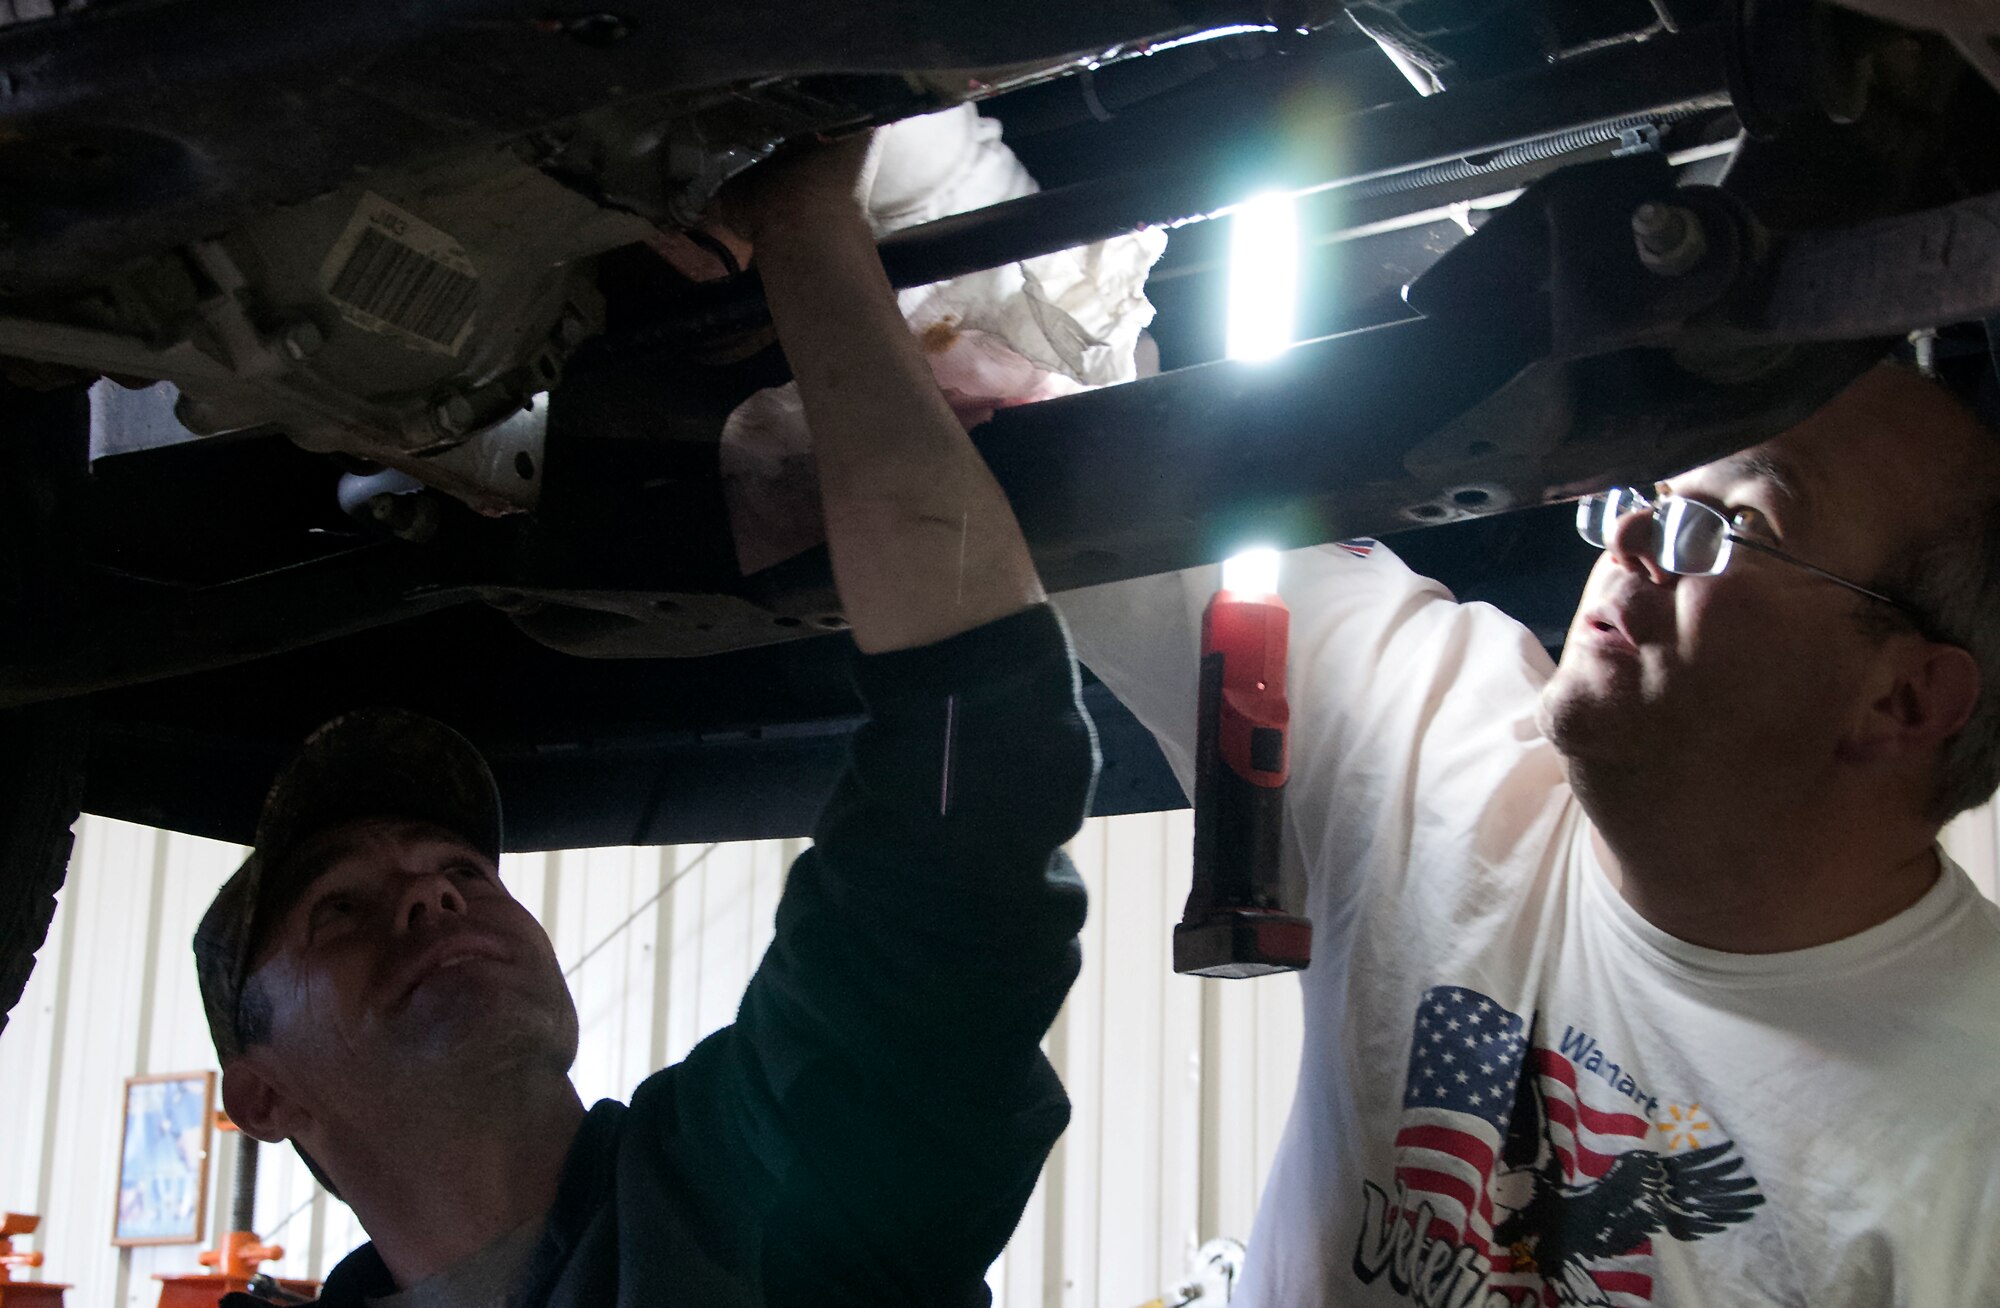 Retired Tech. Sgt. Timothy Staples and Retired Master Sgt. Chad Colgate work together to replace a fuel pump on Colgate’s truck Nov. 13, 2015, in the Auto Skills Shop on F.E. Warren Air Force Base, Wyo. The Auto Skills Shop provides access for Airmen, retirees and their families to use lifts and tools to work on vehicles. (U.S. Air Force photo by Senior Airman Brandon Valle)